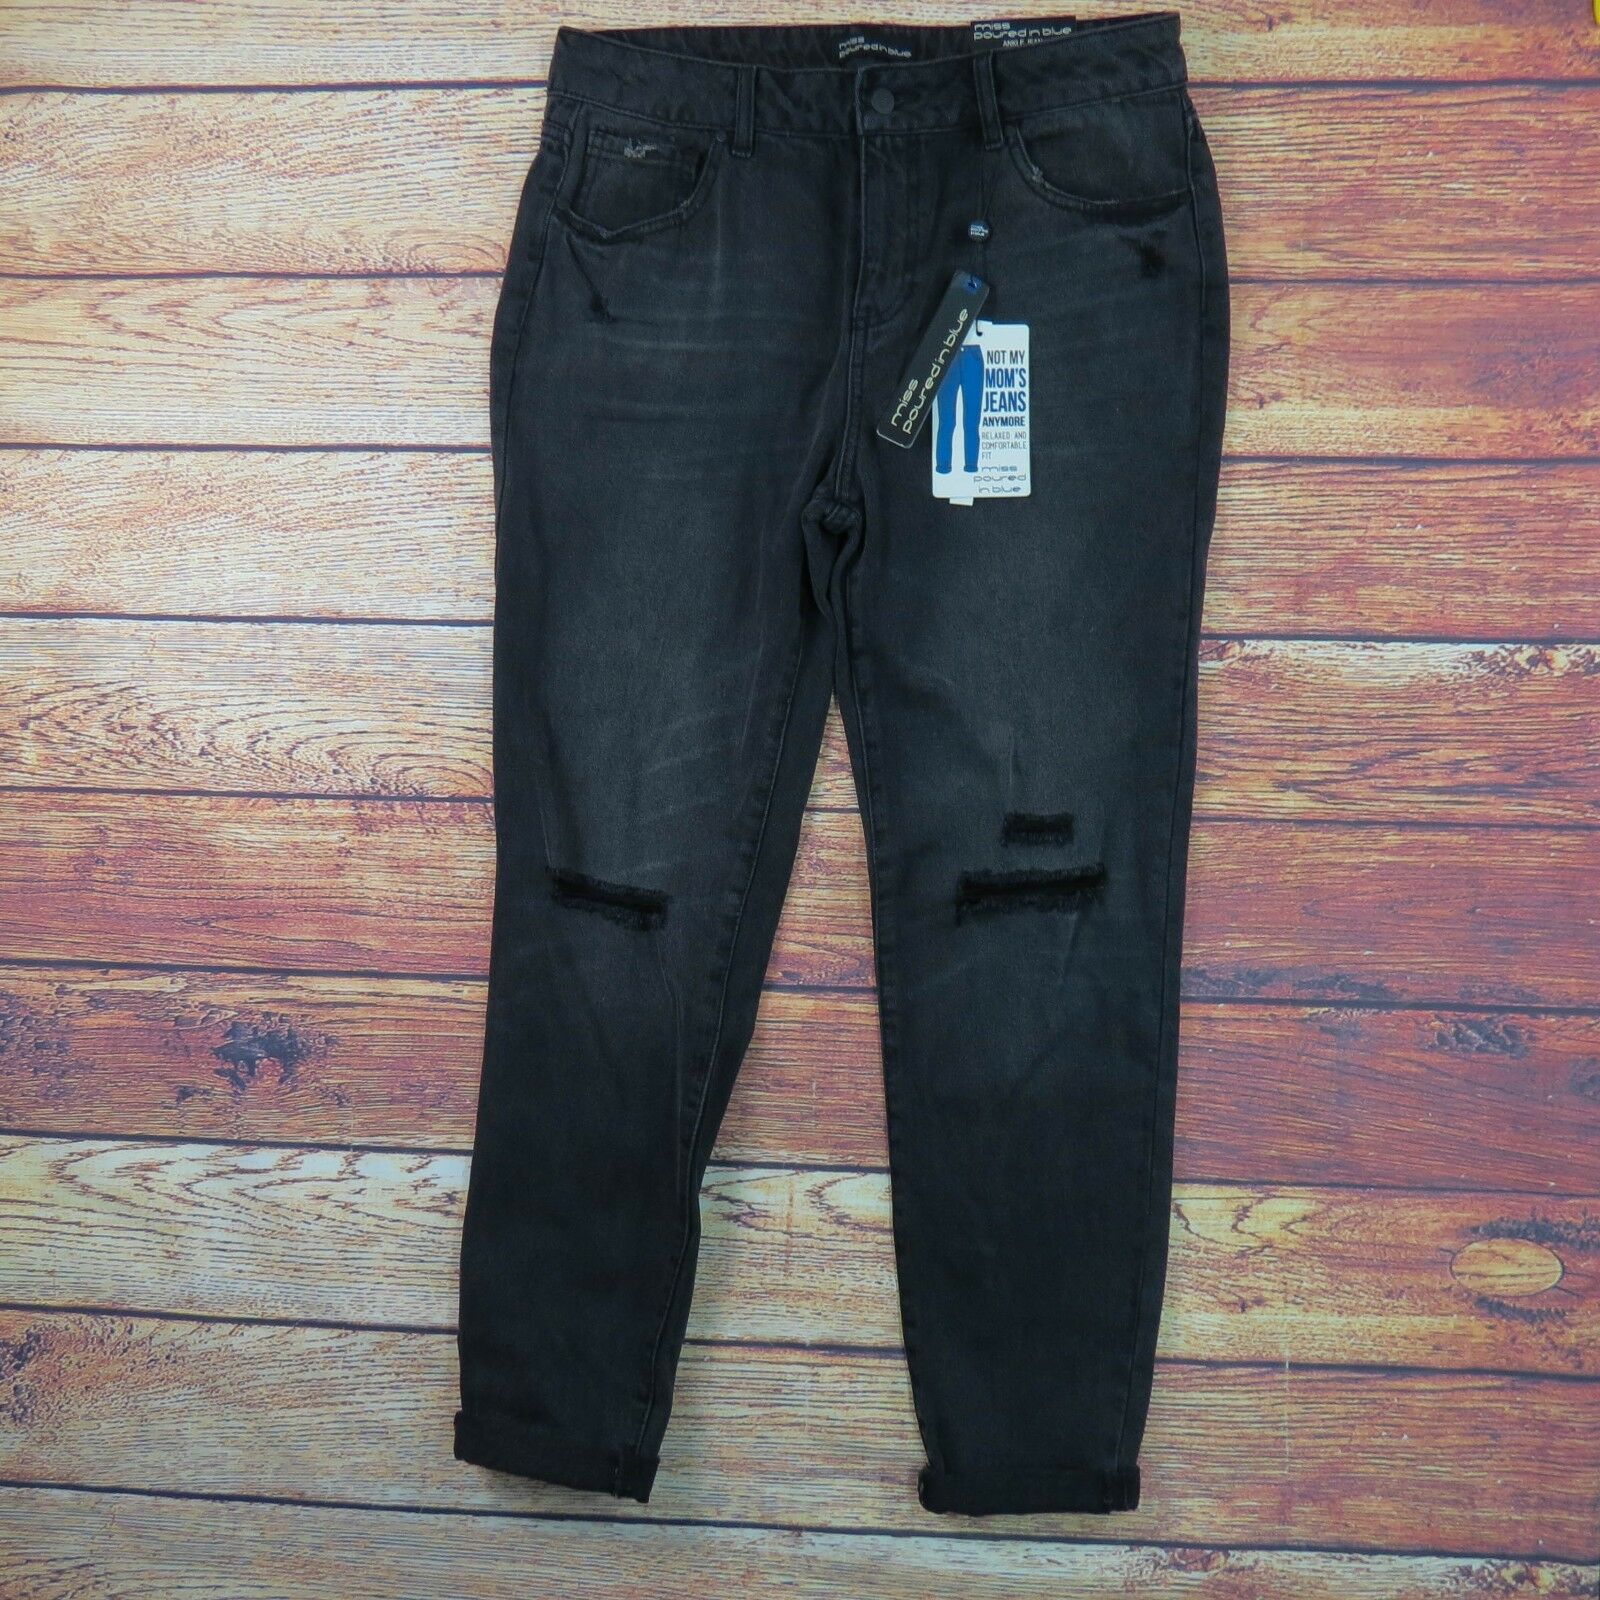 Miss Poured In Blue Ankle Jeans Black 